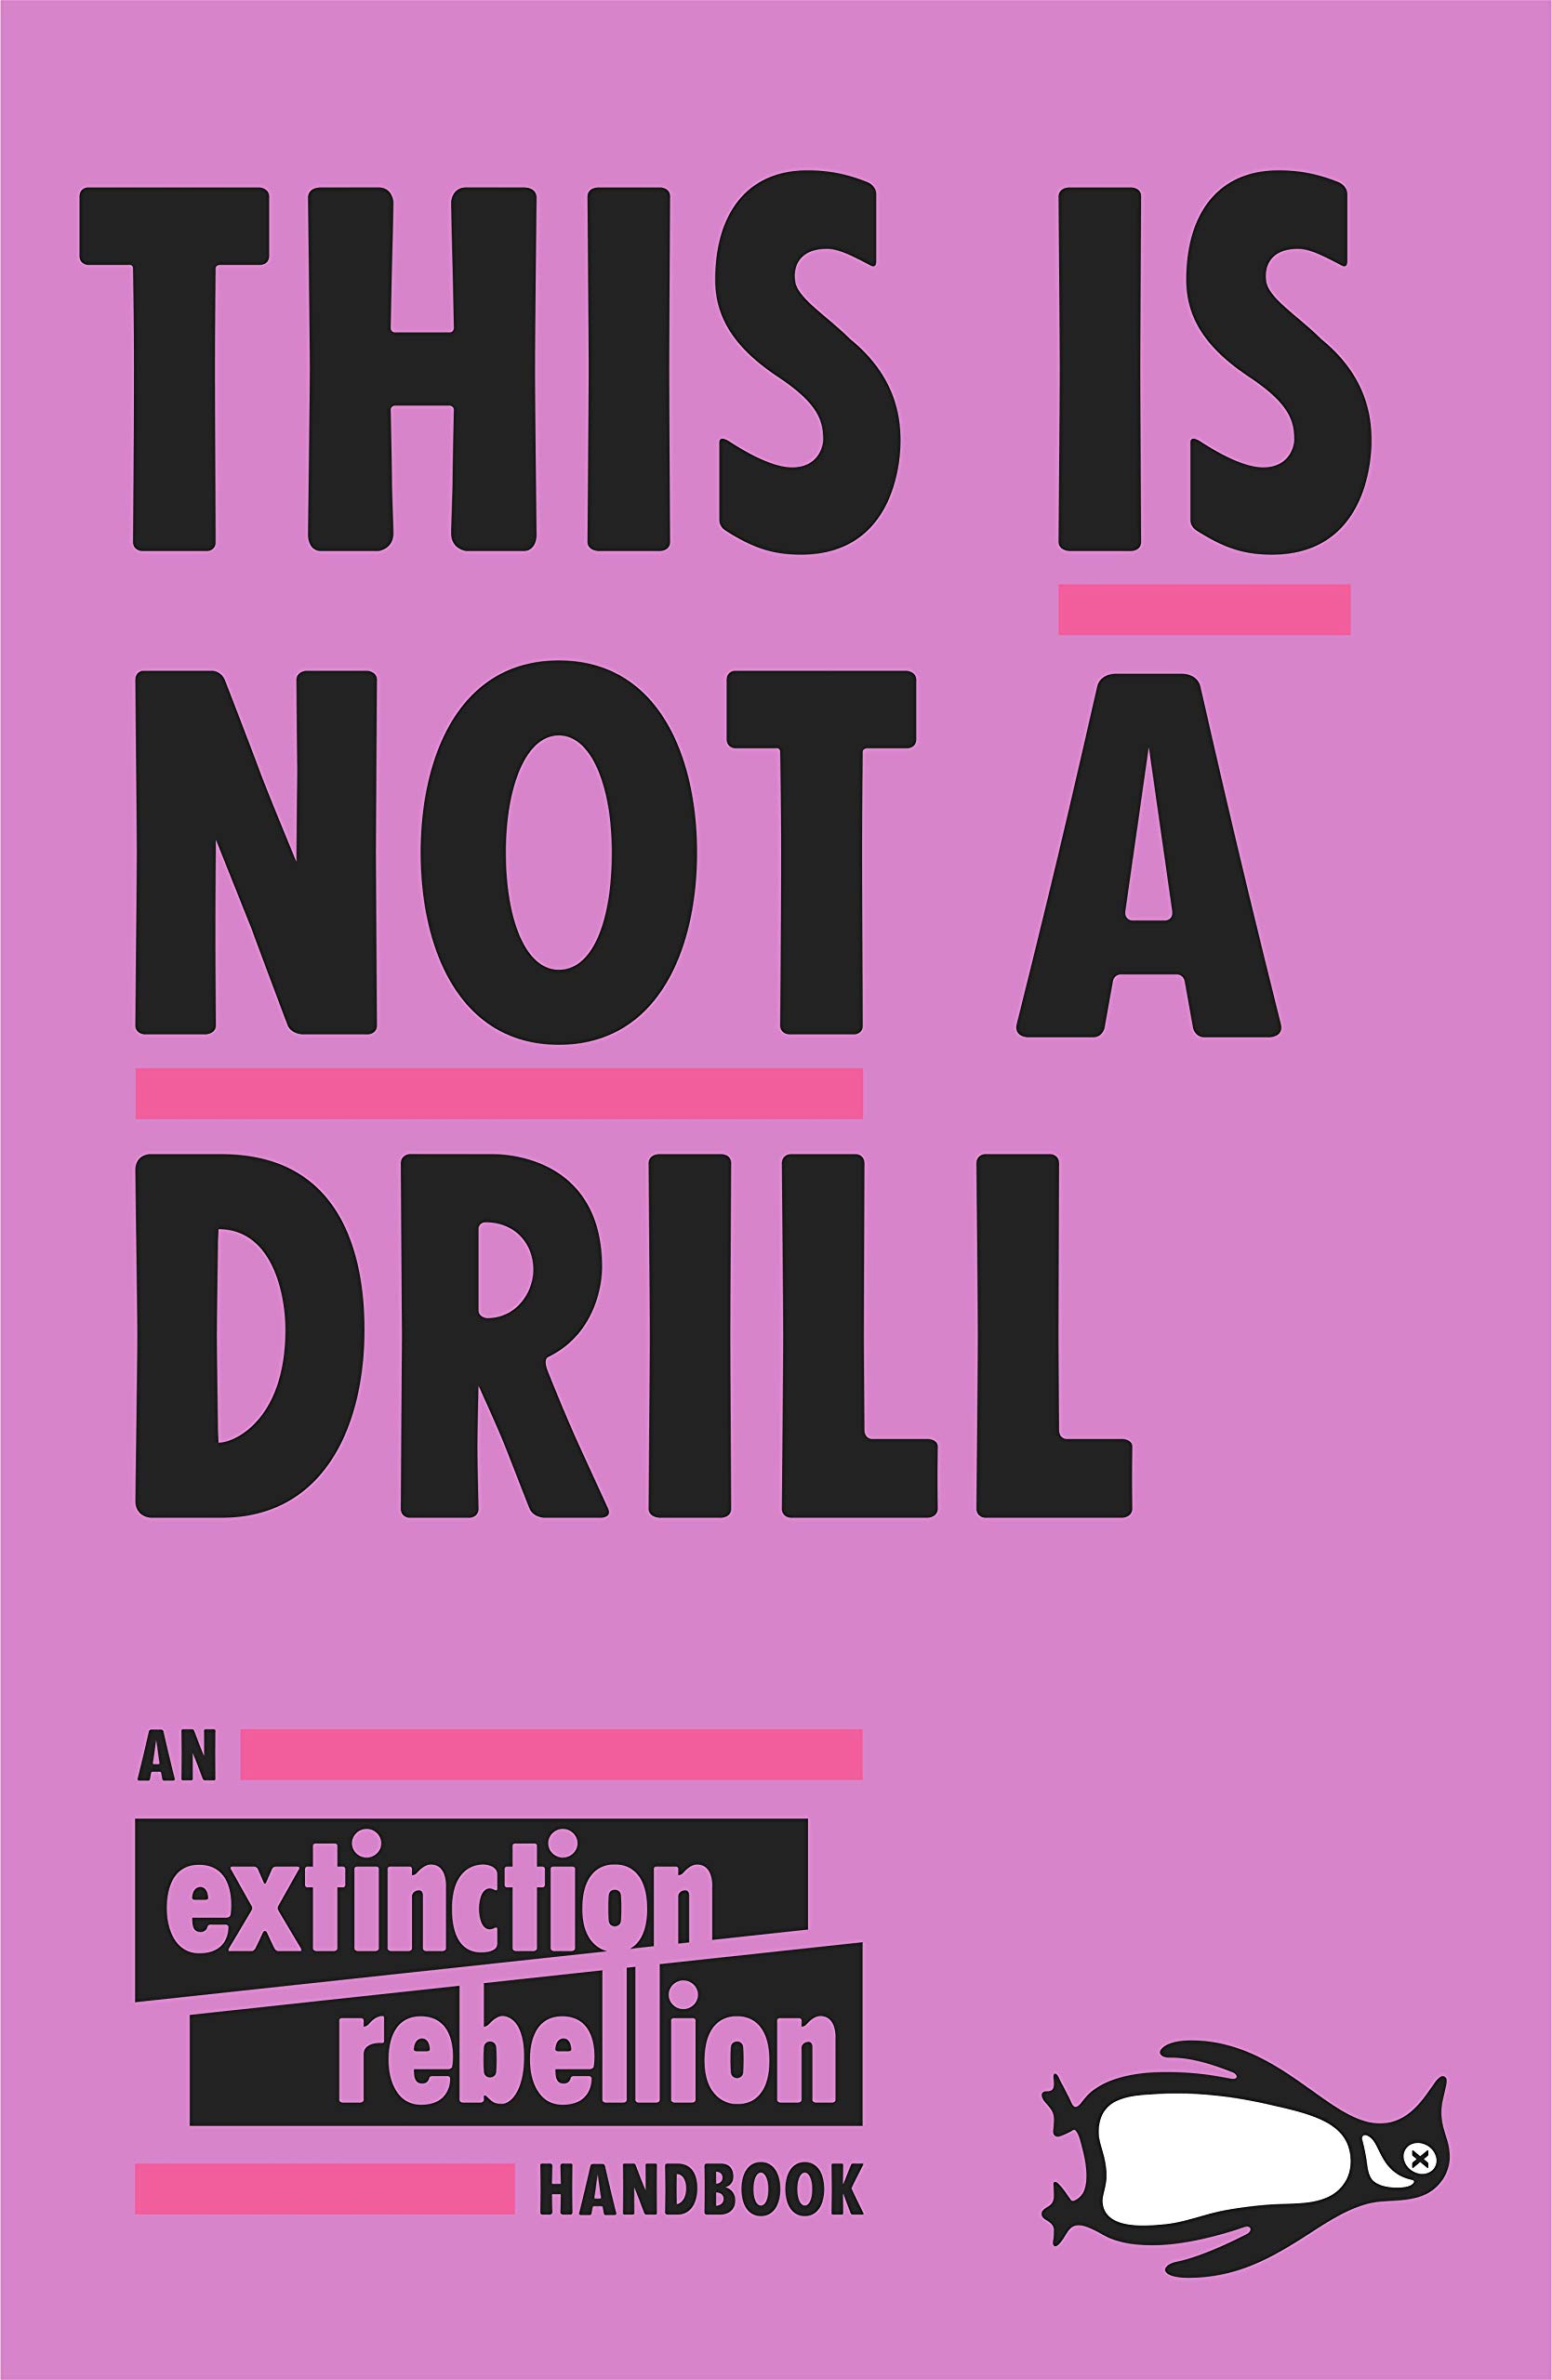 This Is Not A Drill | Extinction Rebellion